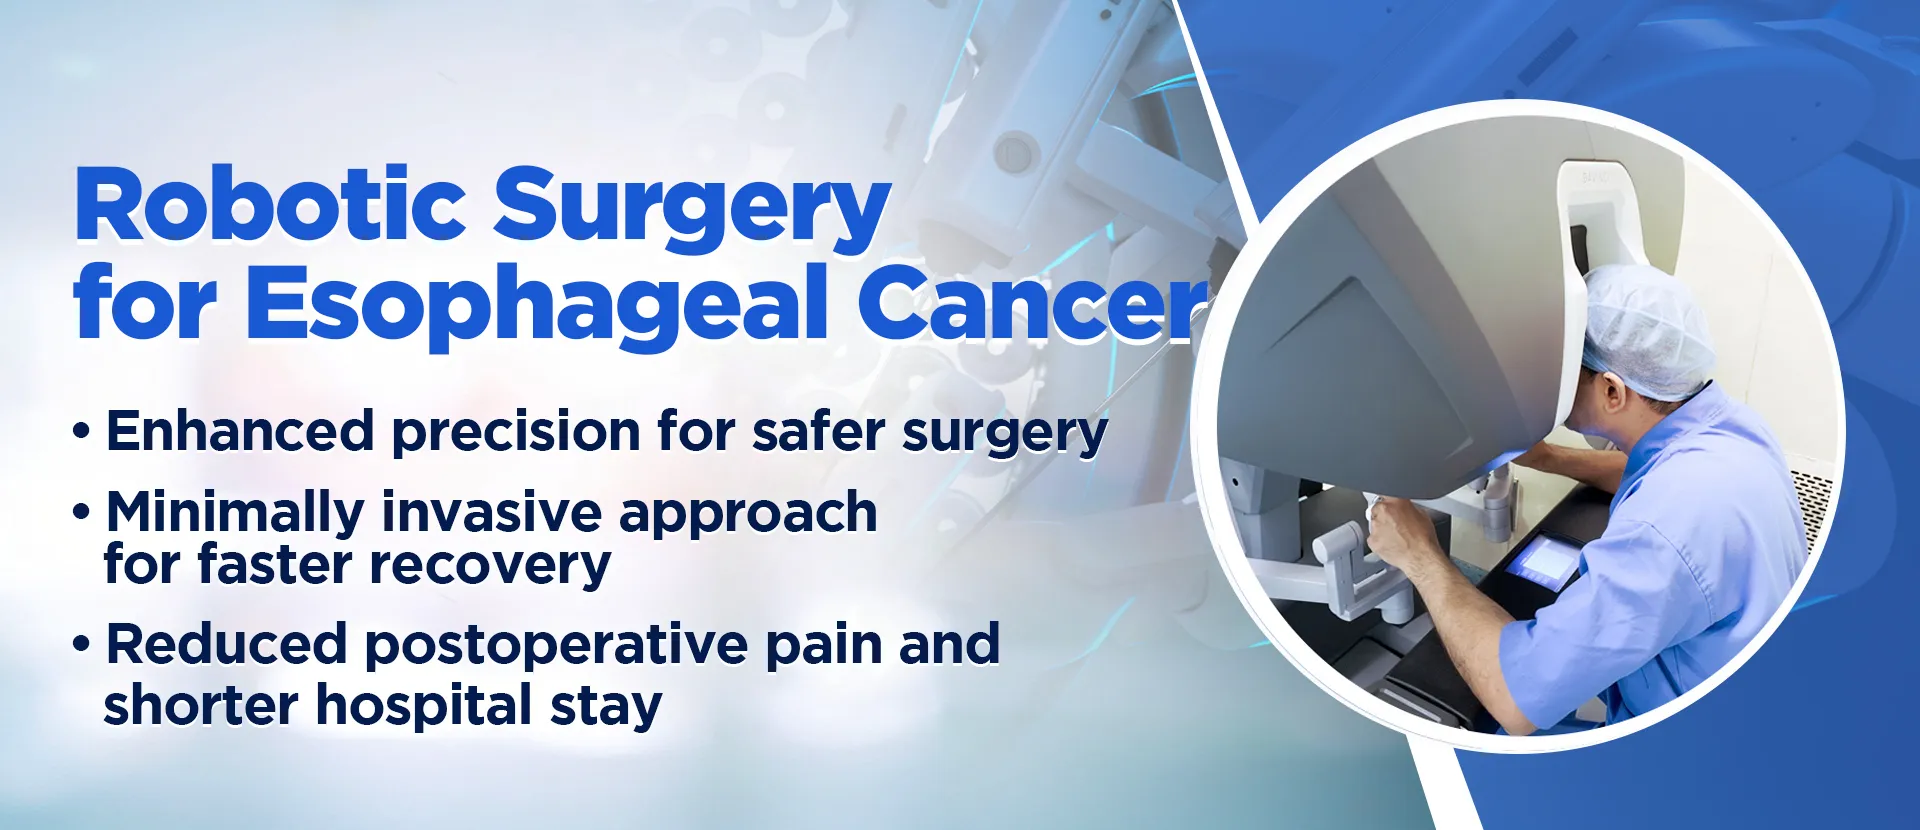 Benefits of Robotic Surgery for Esophageal cancer by onco surgeon in Ahmedabad